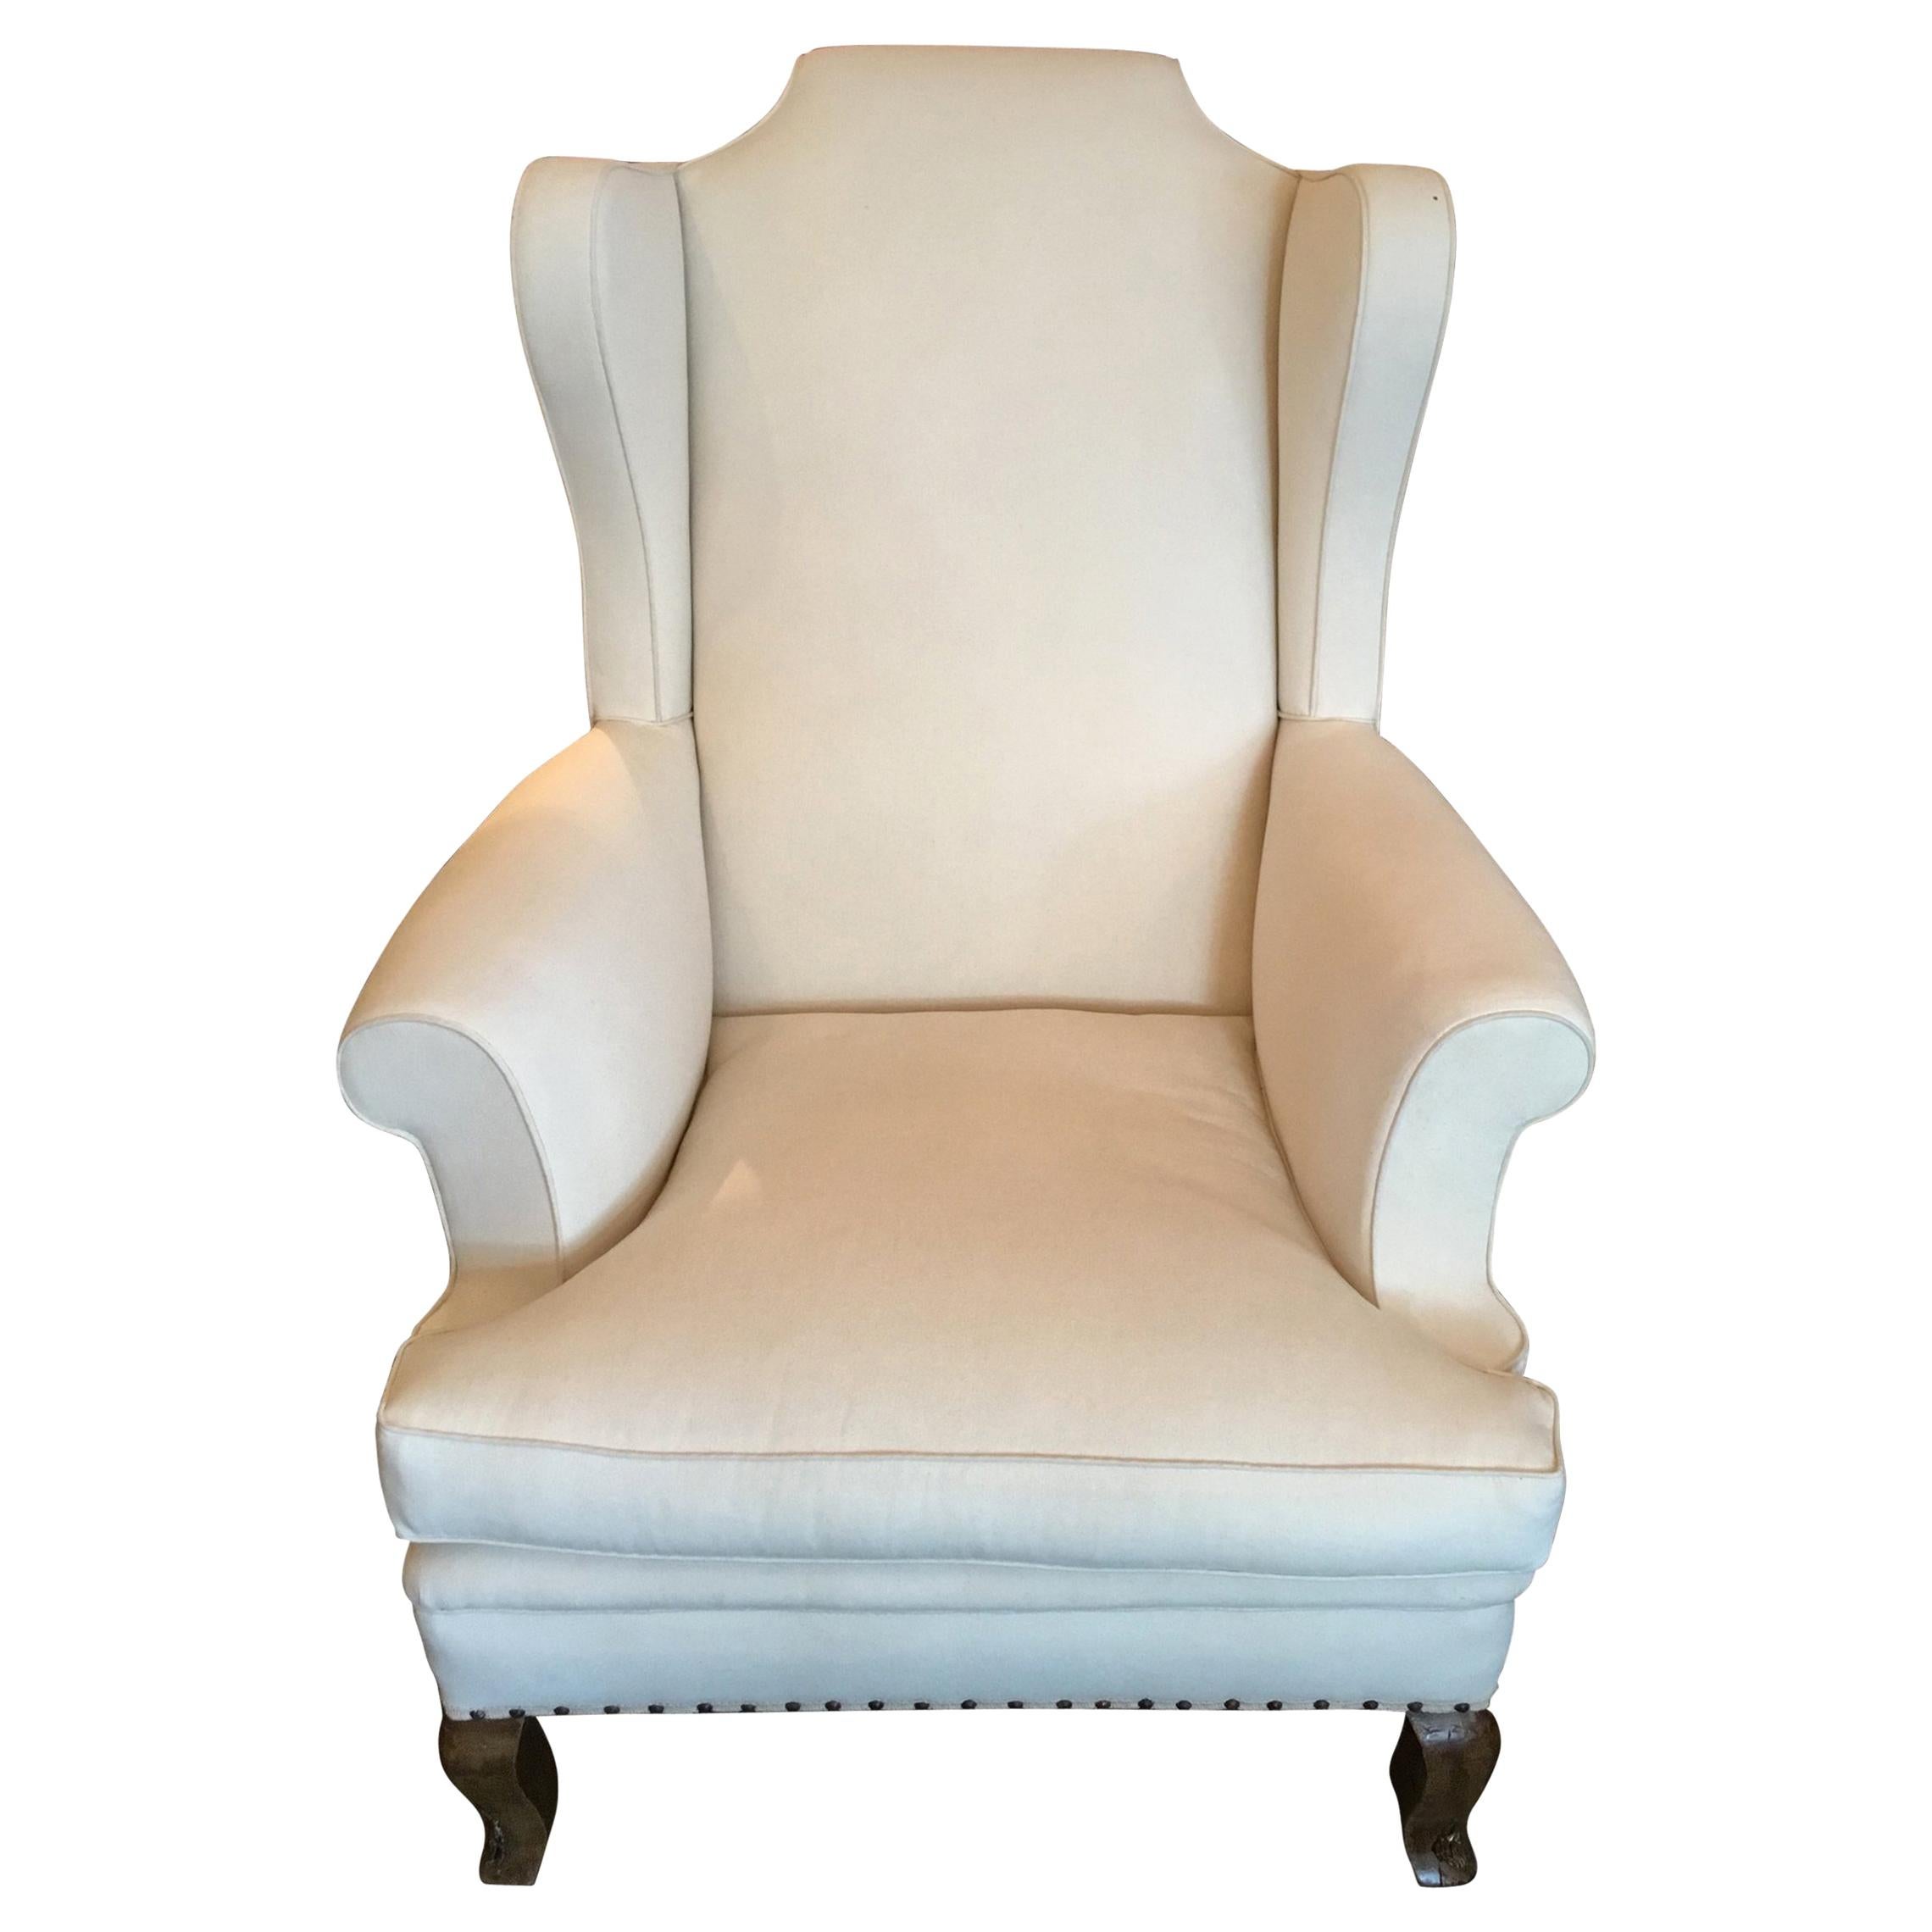 French 19th Century Wingback Armchair Reupholstered in Belgian Linen